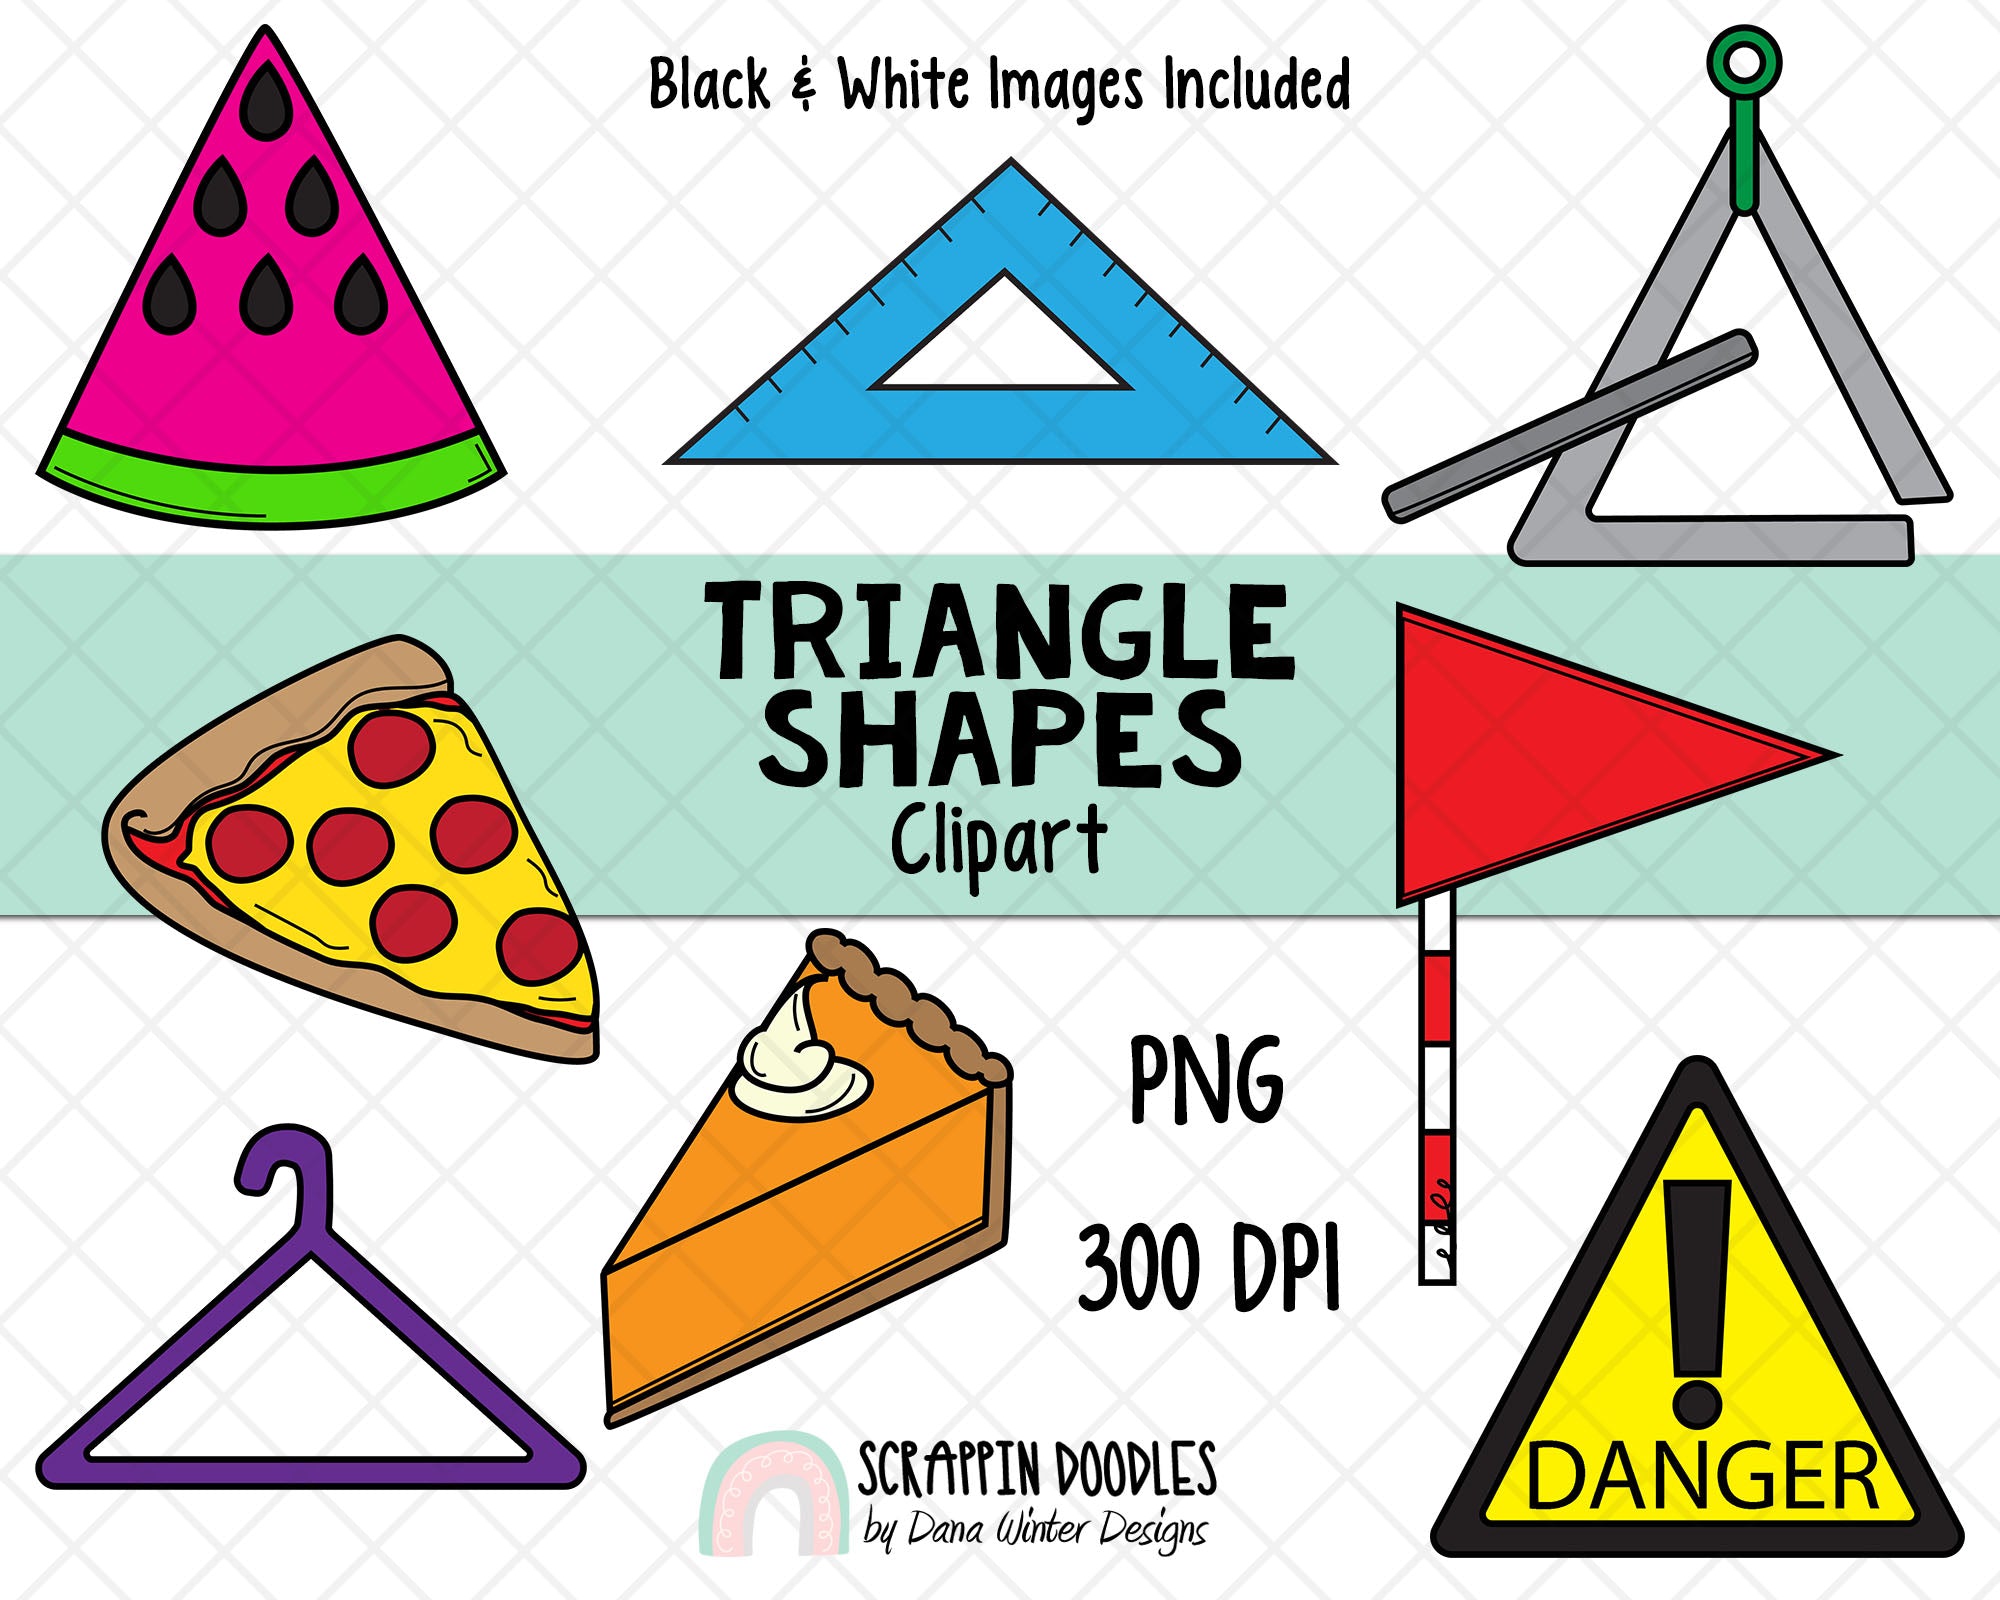 geometric shapes in everyday life